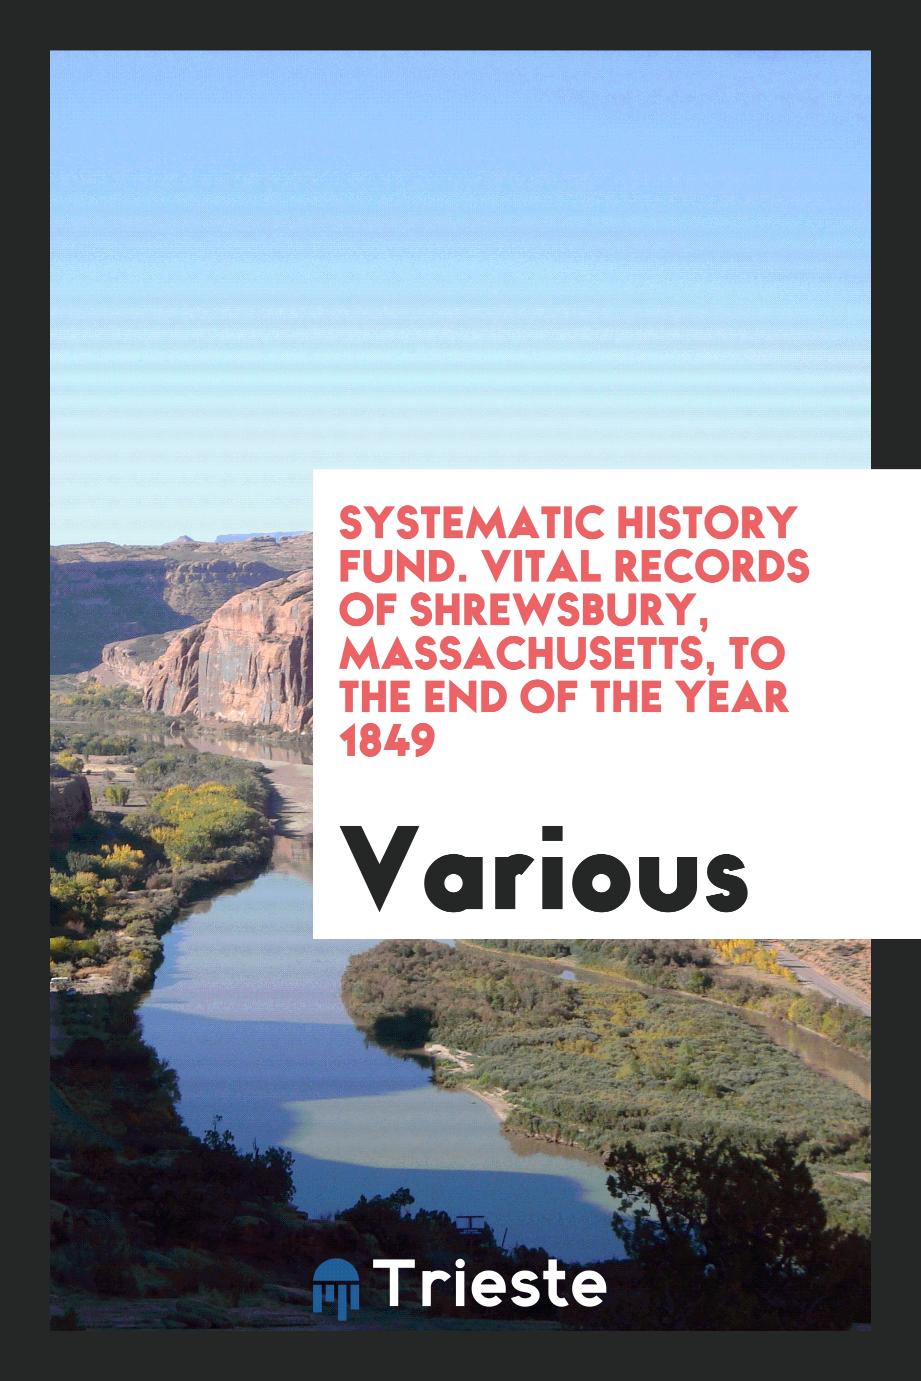 systematic history fund. Vital records of Shrewsbury, Massachusetts, to the end of the year 1849